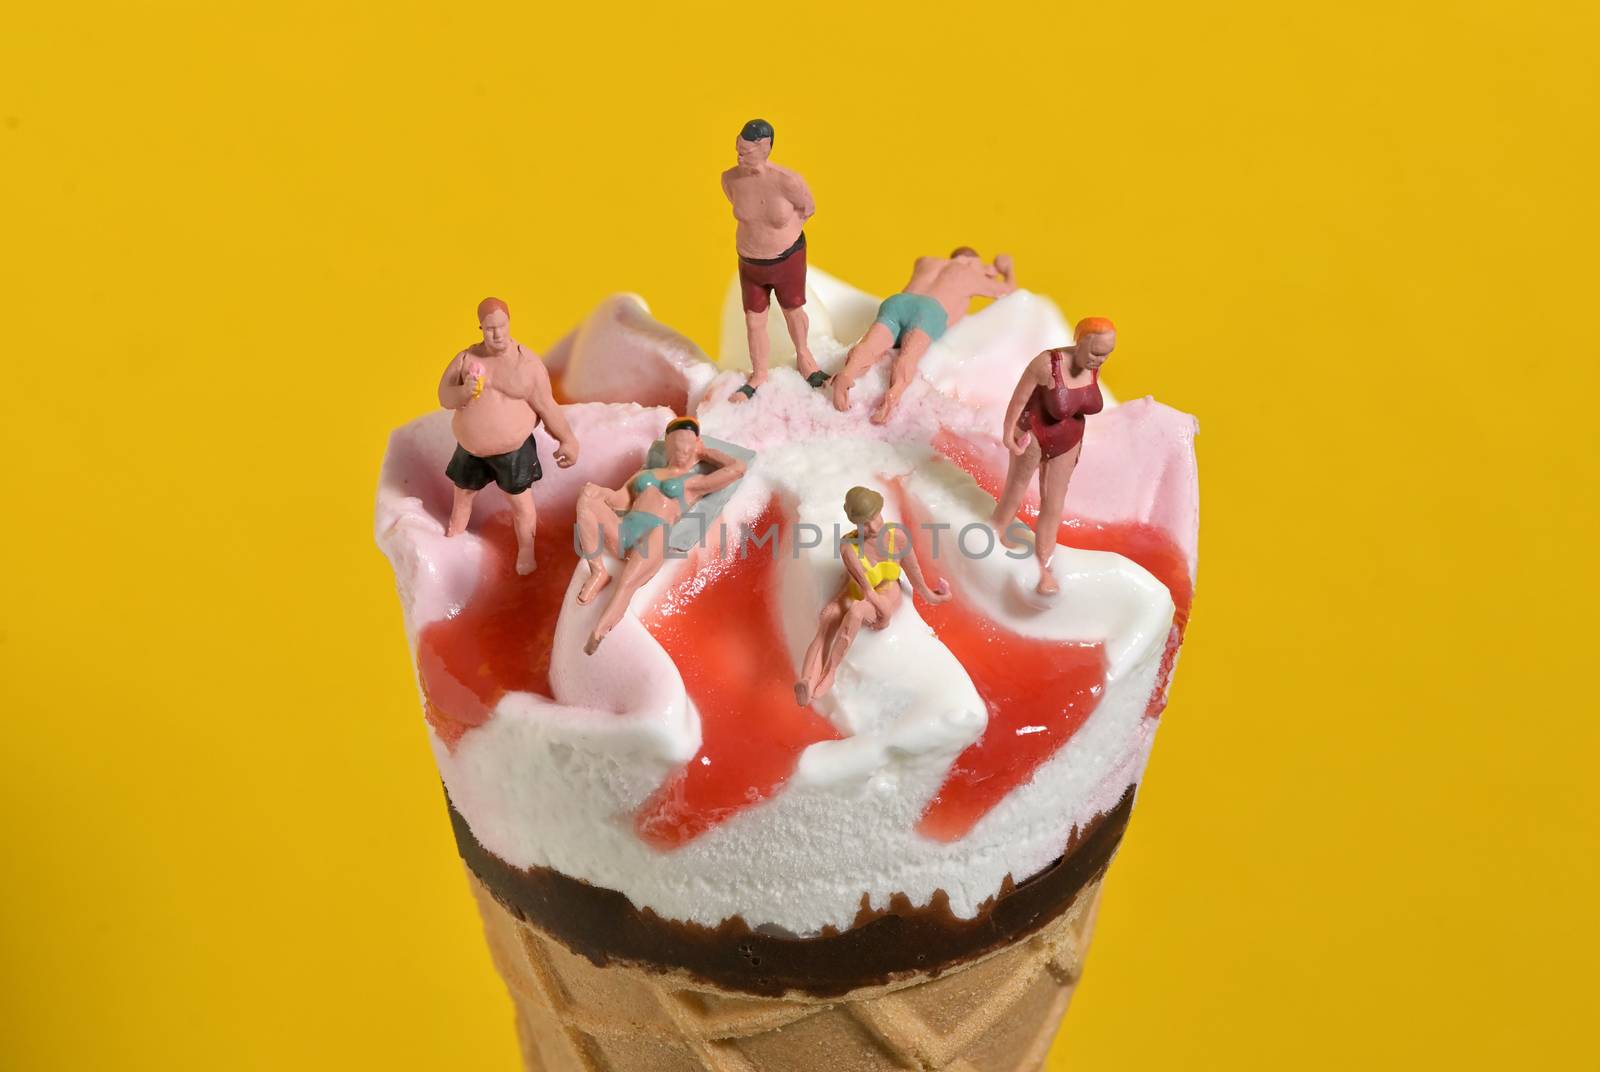 Ice Cream In Waffle Cone and Miniature People by mady70